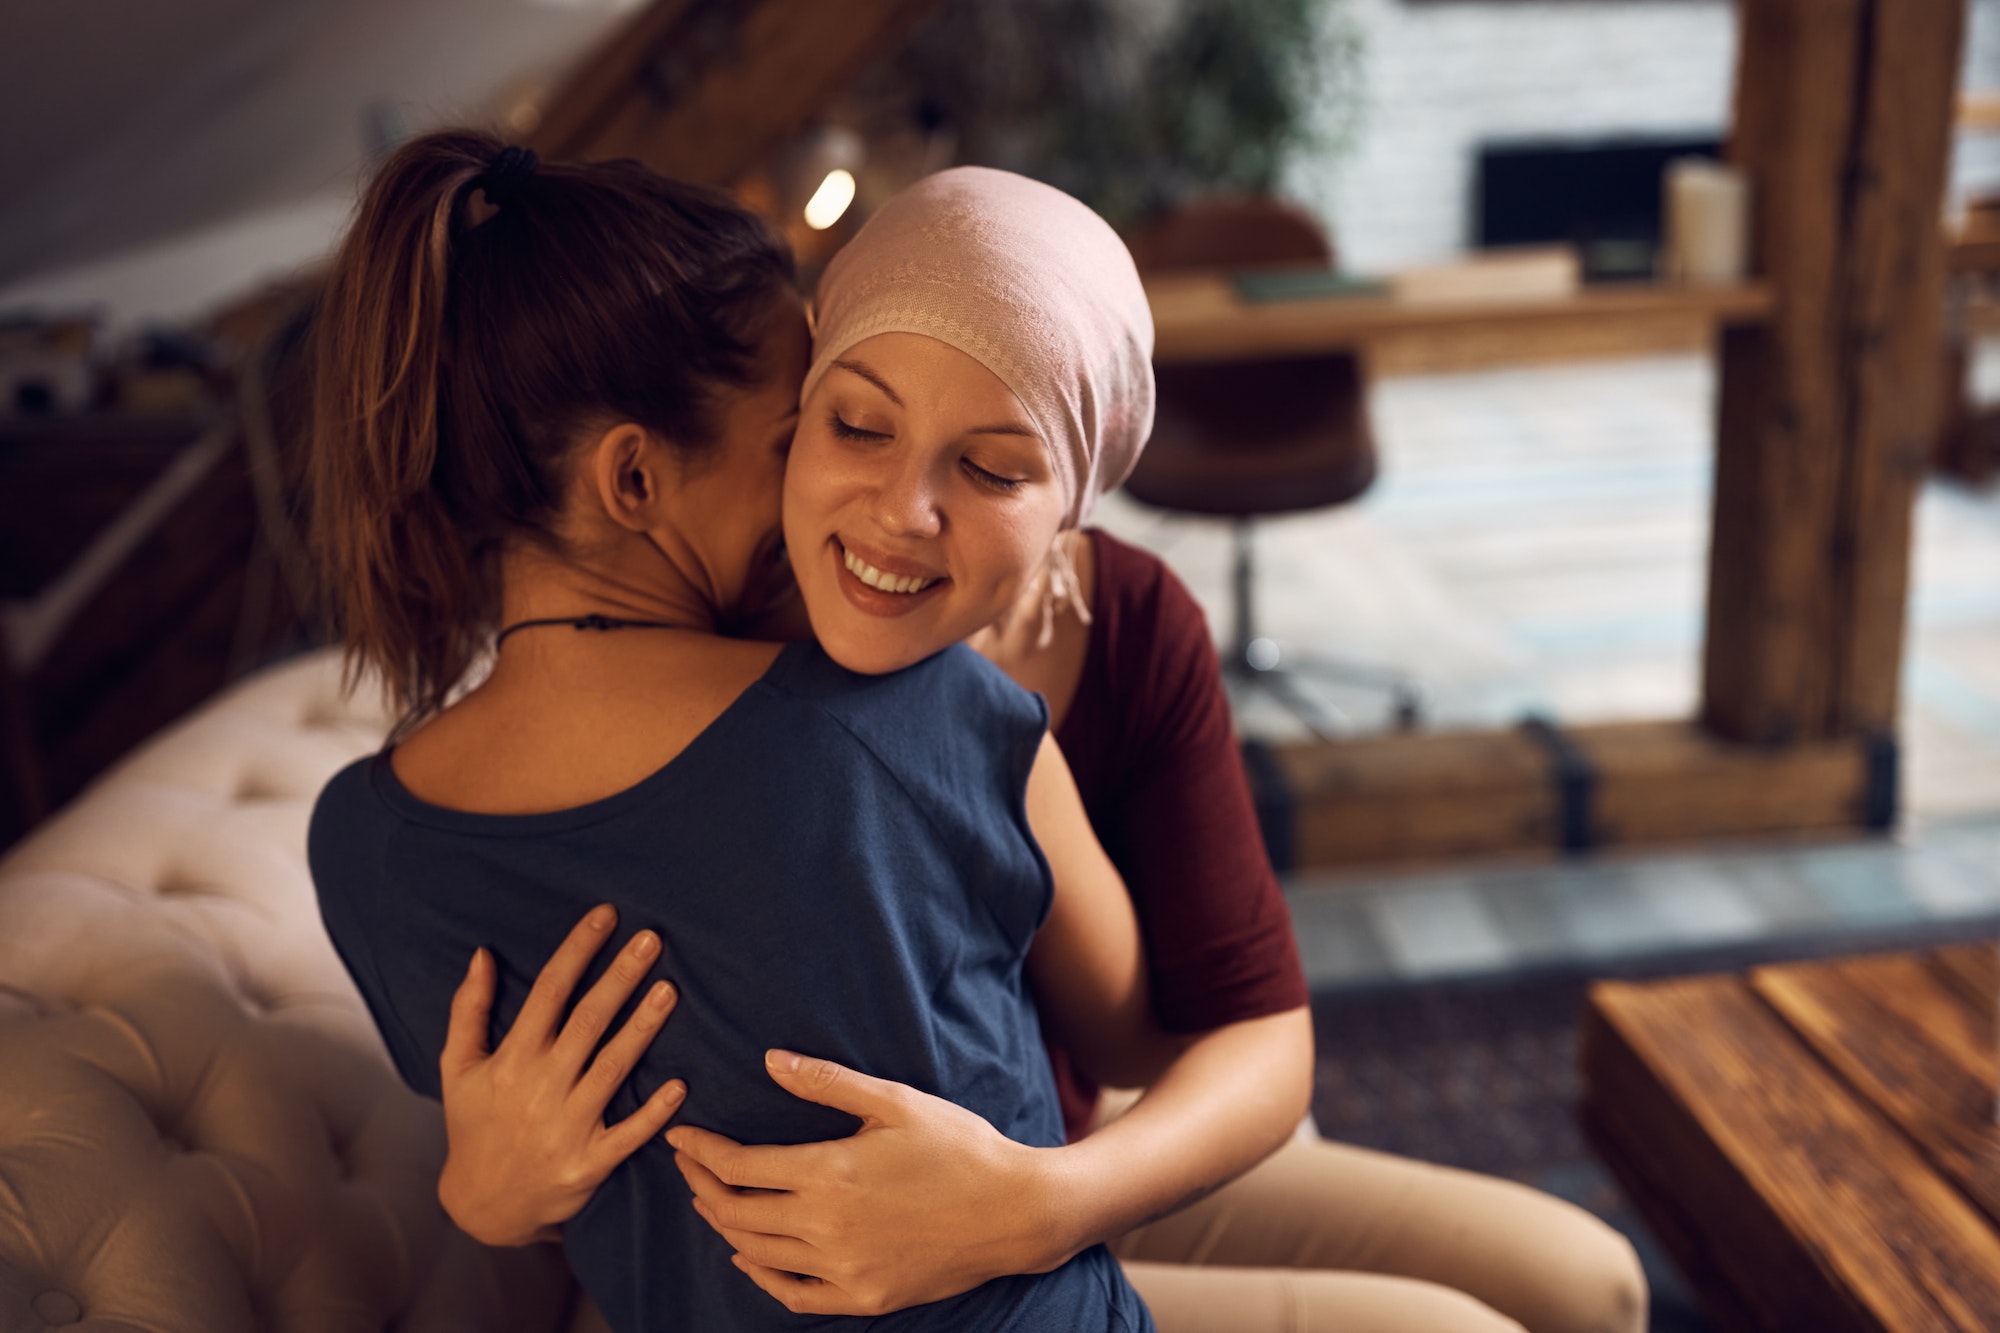 Happy cancer patient embracing her friend who is visiting her at home.